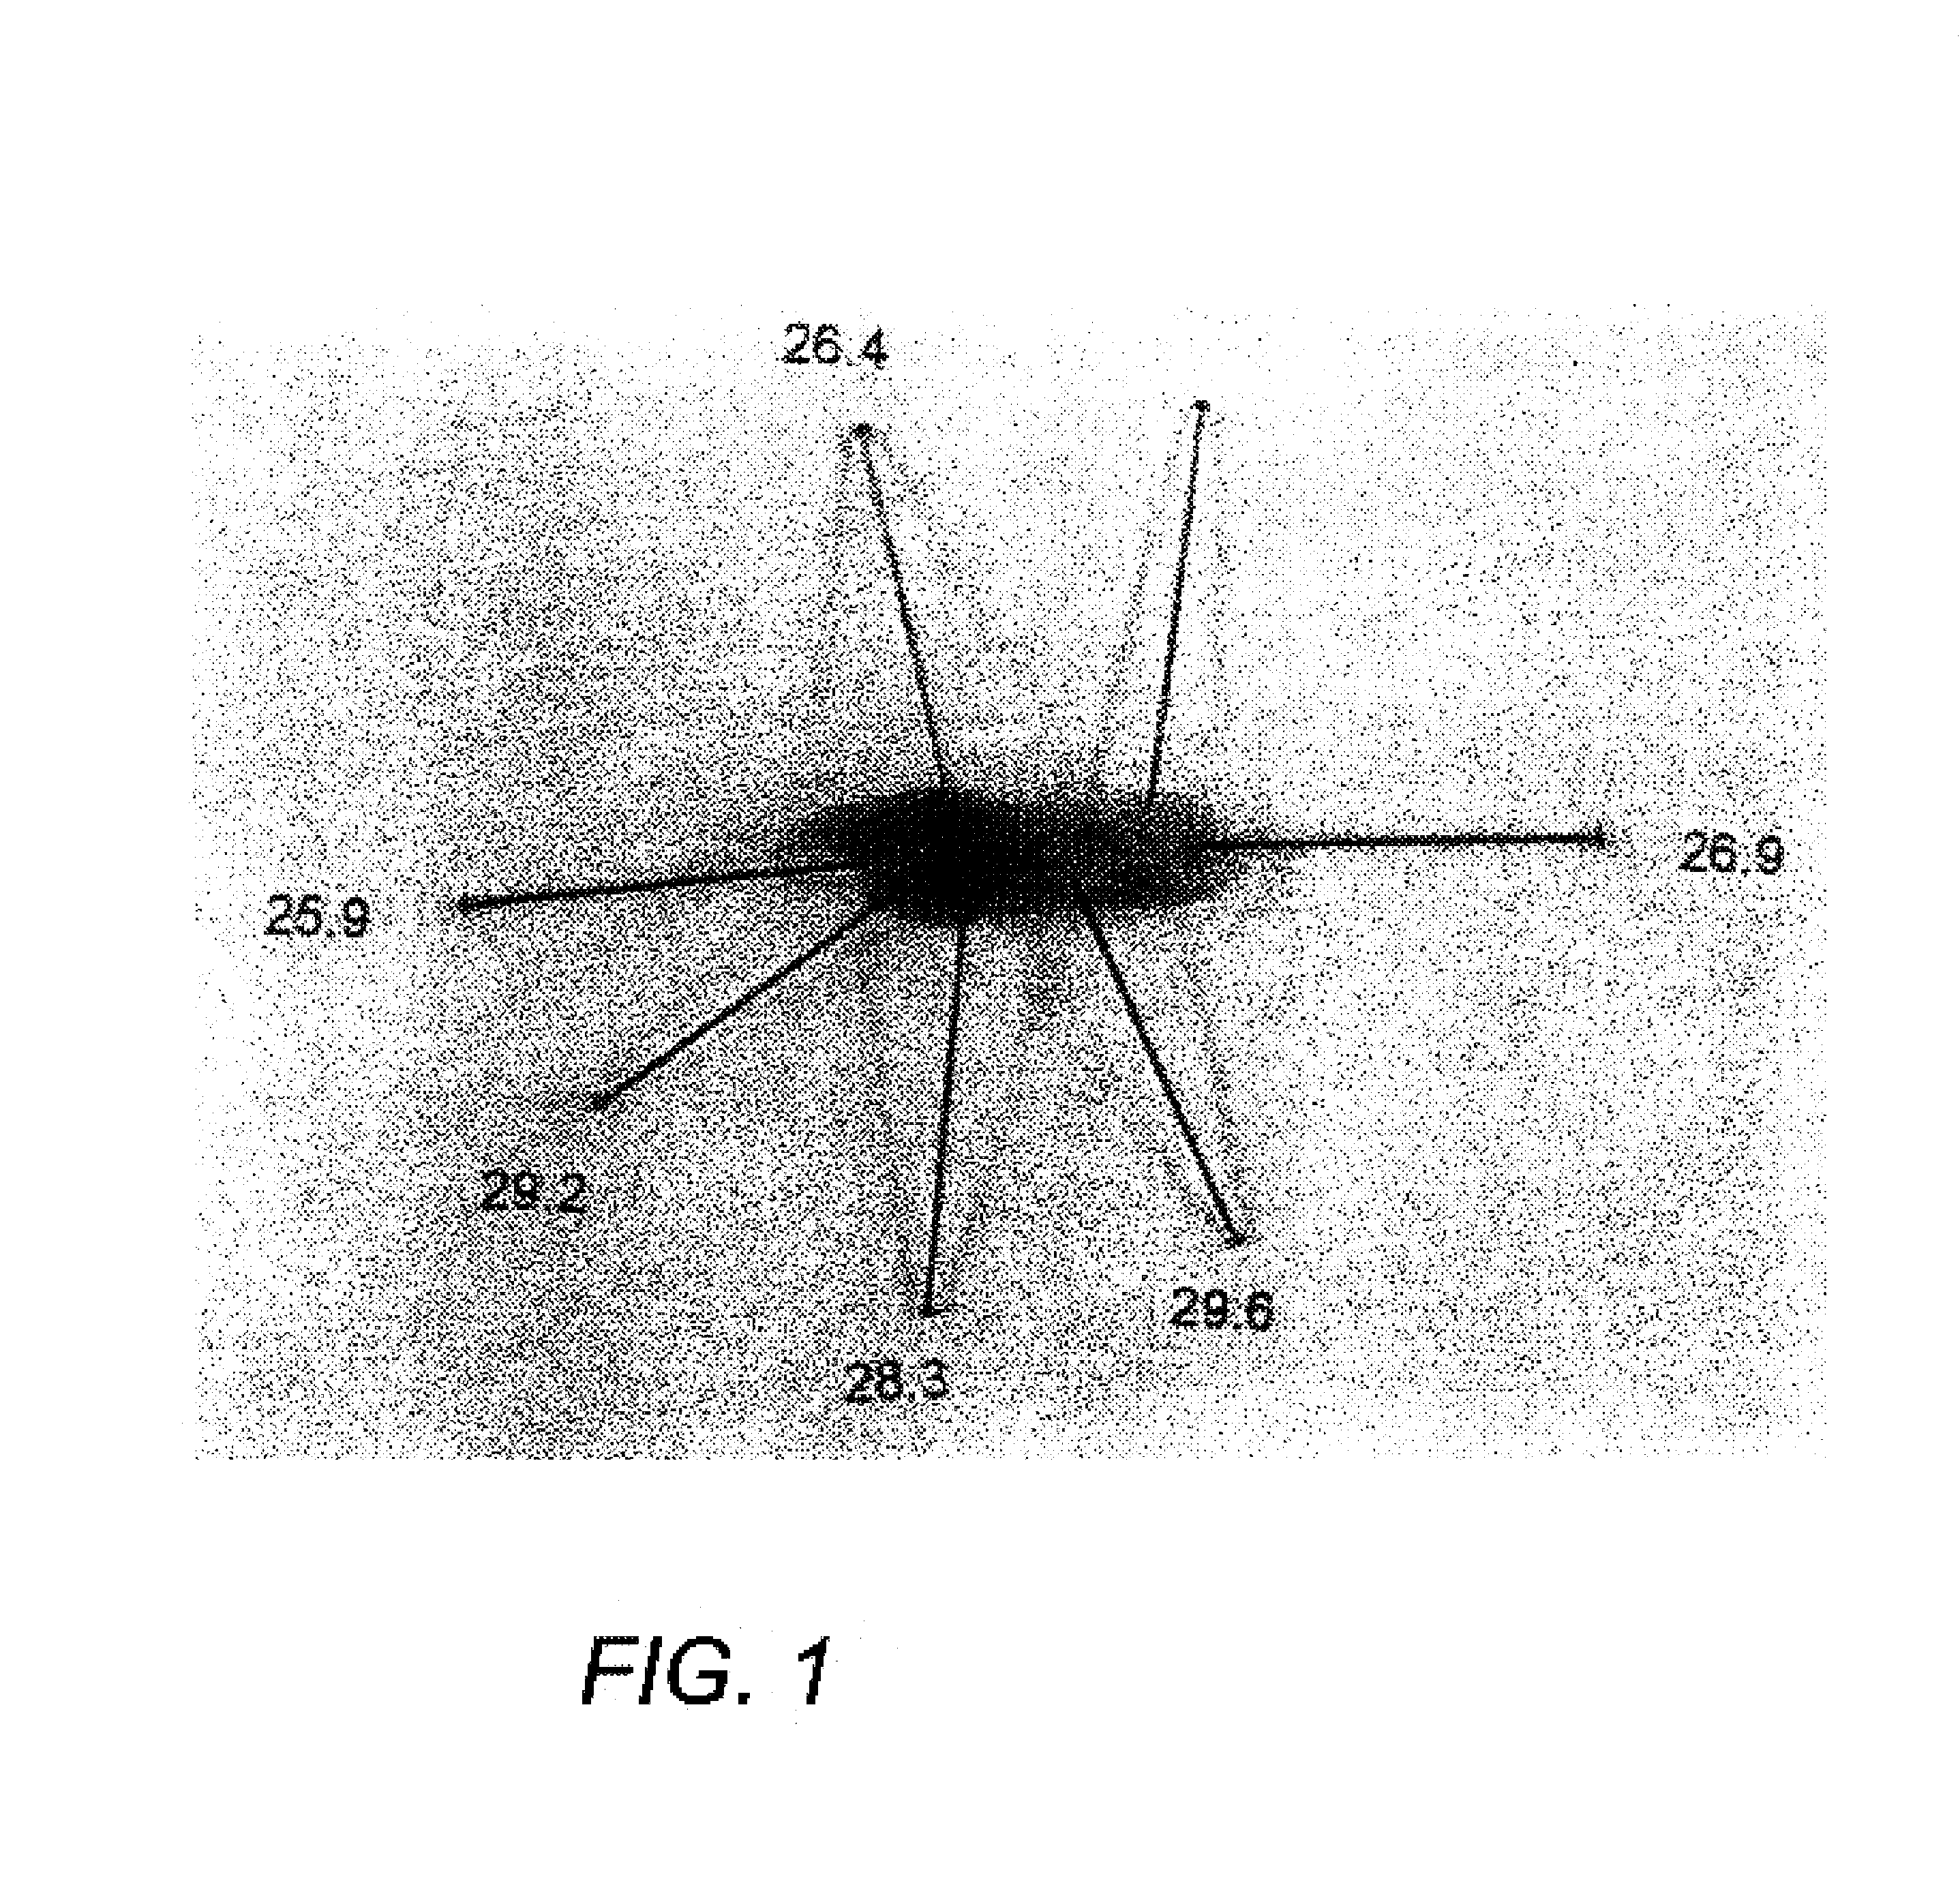 Method and apparatus for detecting vulnerable atherosclerotic plaque